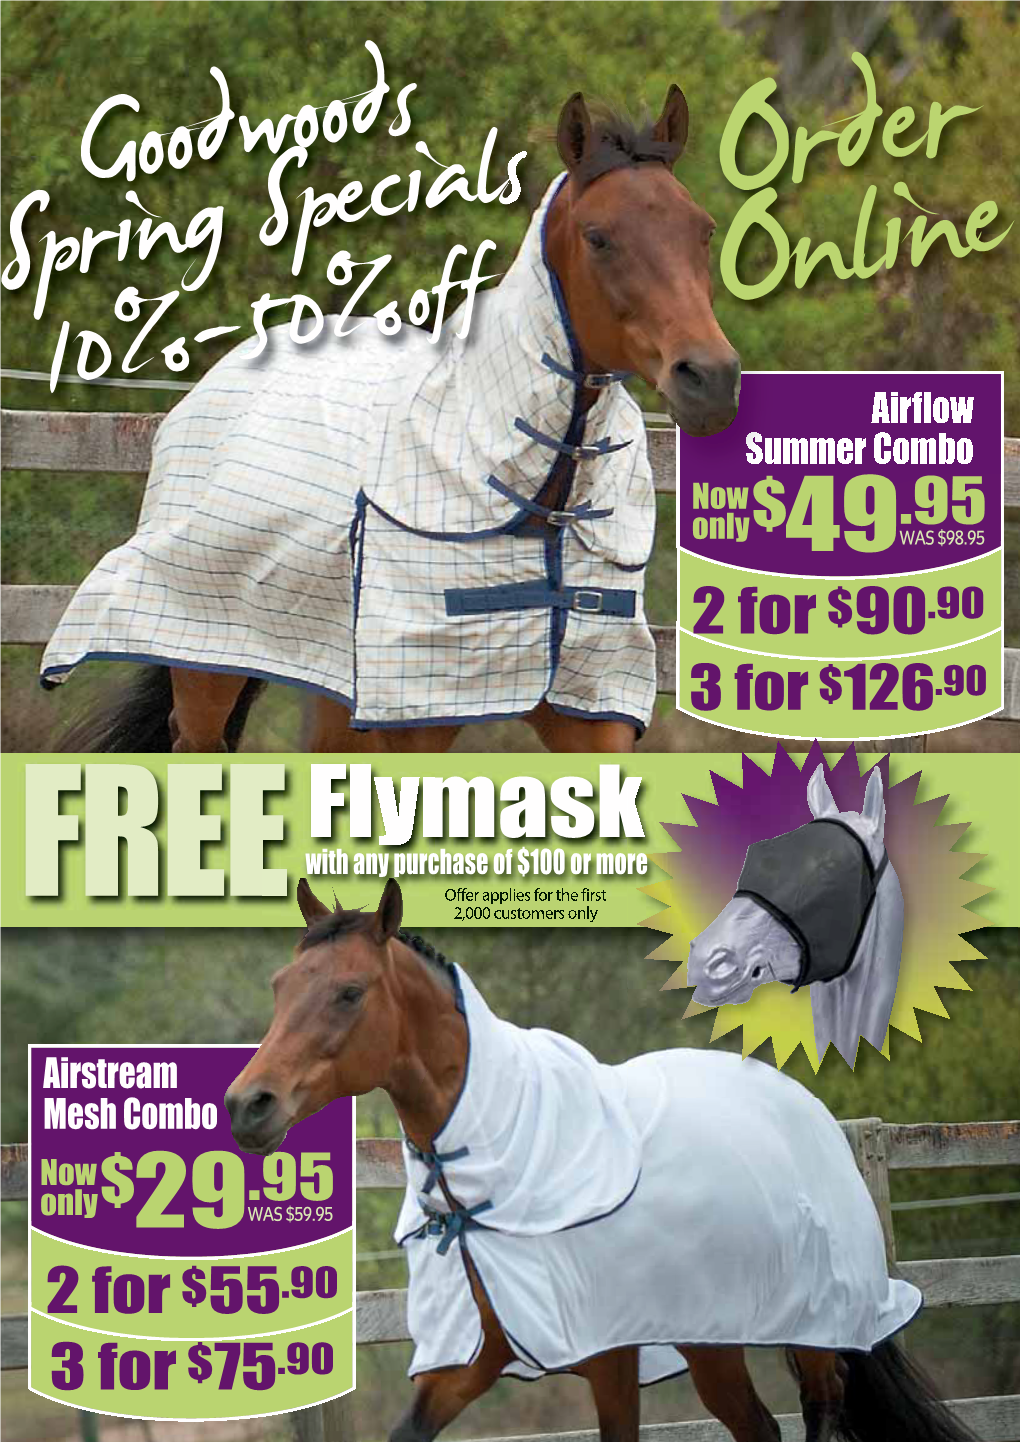 Flymask with Any Purchase of $100 Or More FREE Offer Applies for the First 2,000 Customers Only